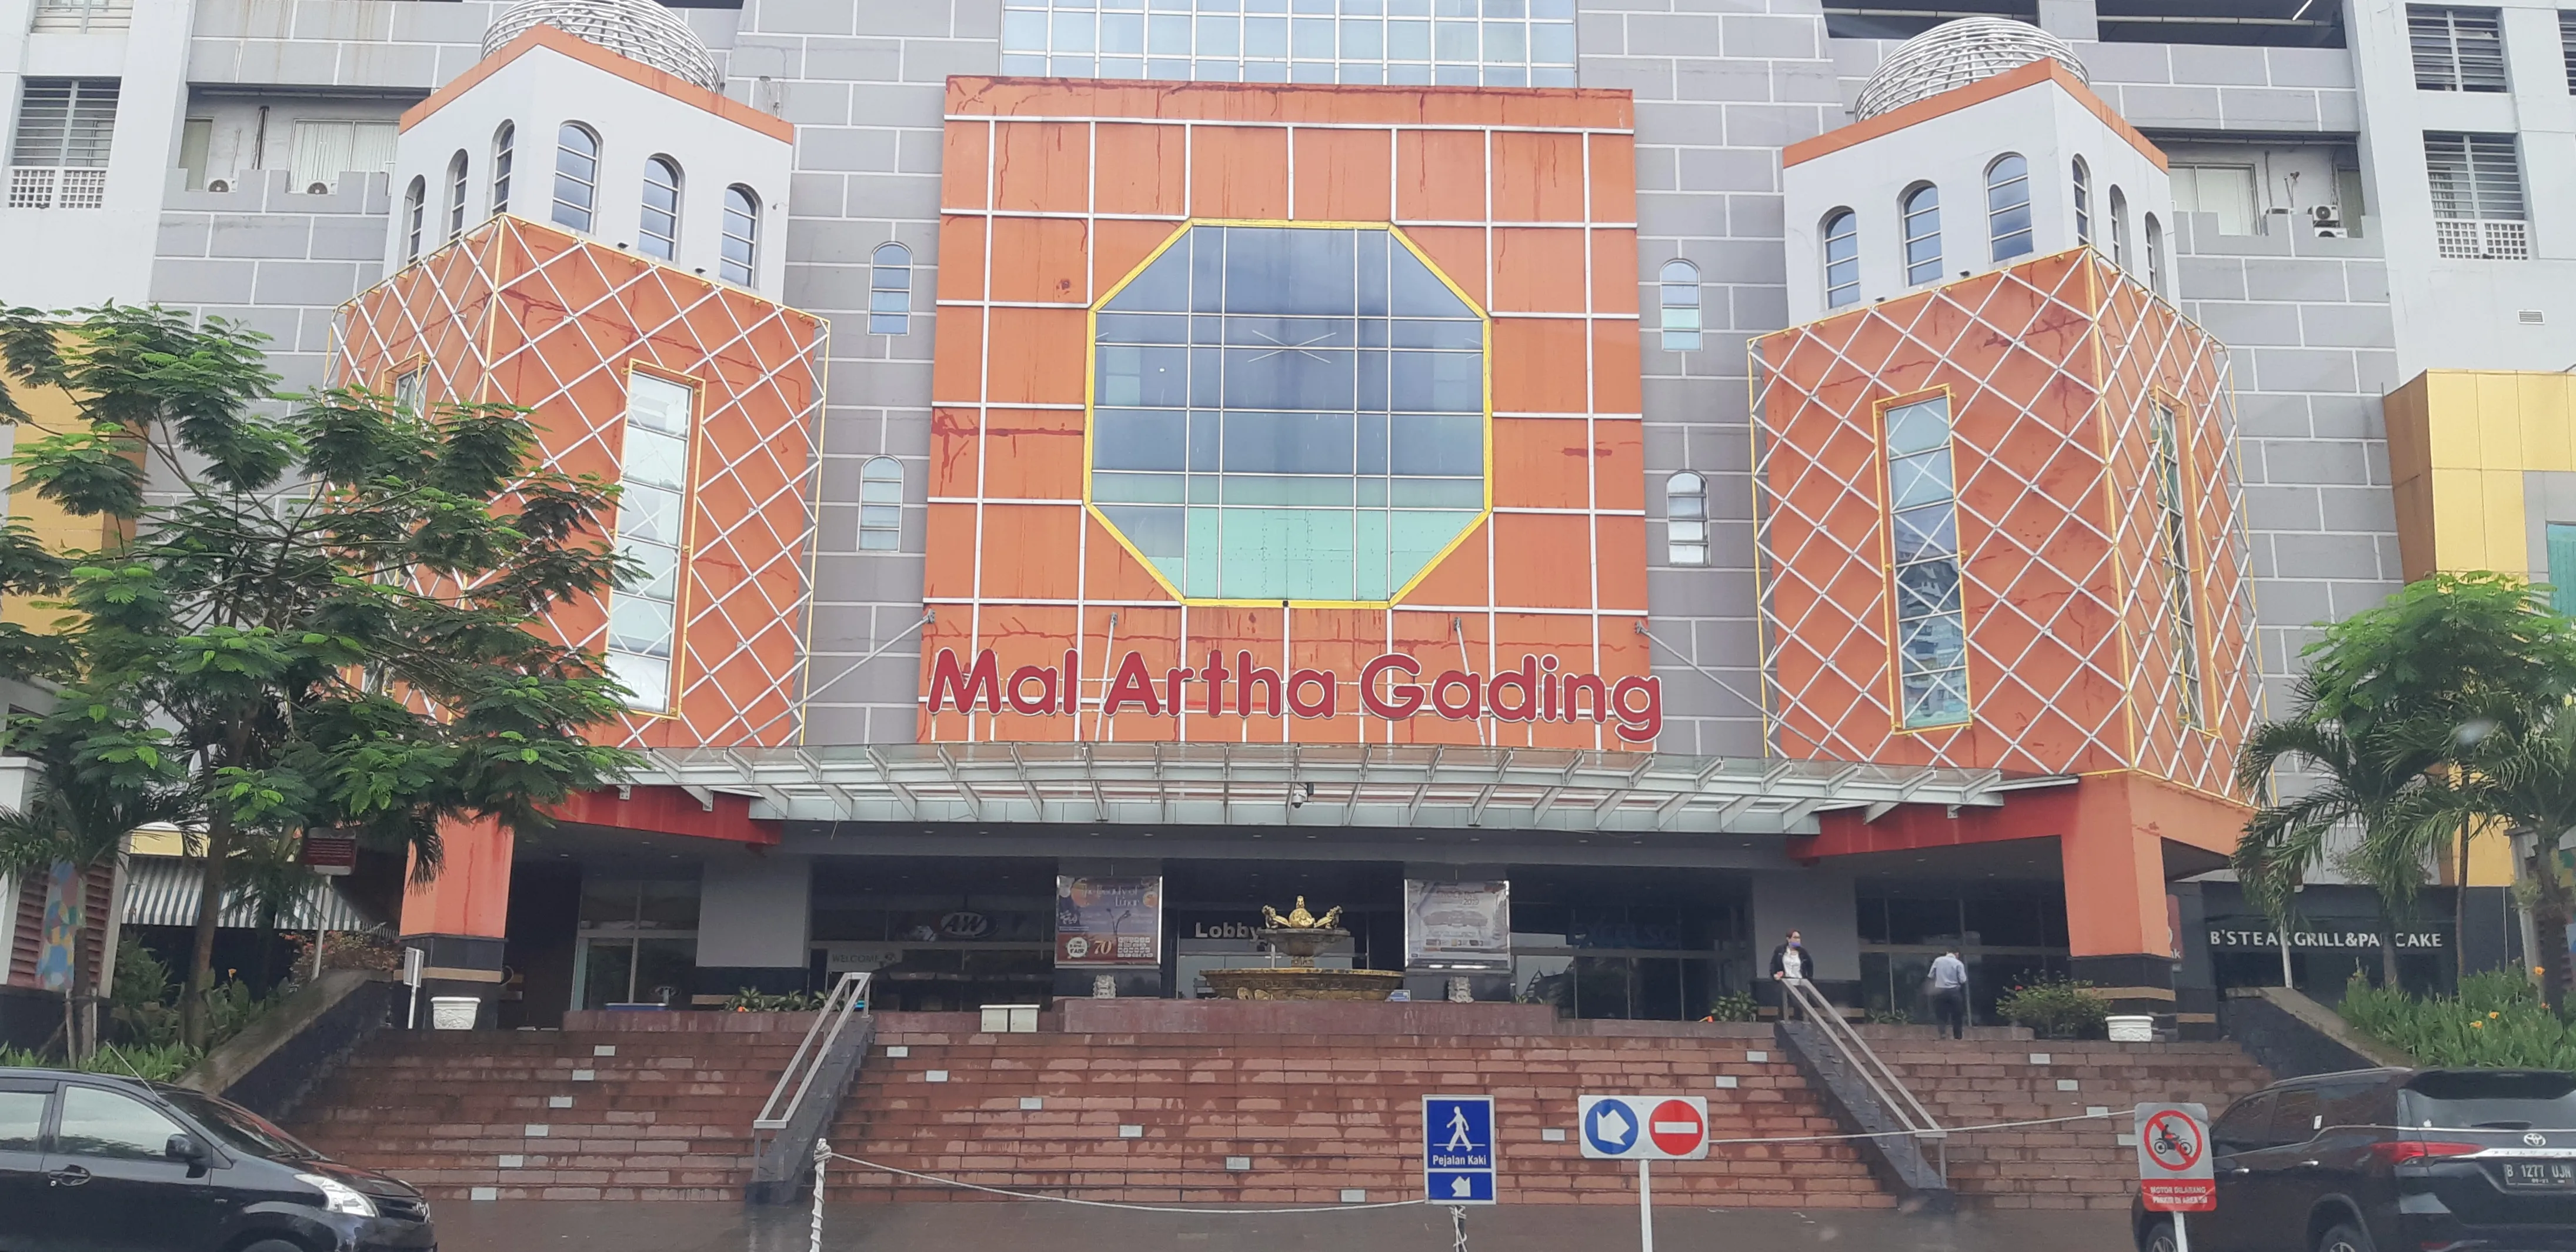 Mal Artha Gading in Indonesia, central_asia | Shoes,Accessories,Clothes,Gifts,Sportswear,Swimwear - Country Helper